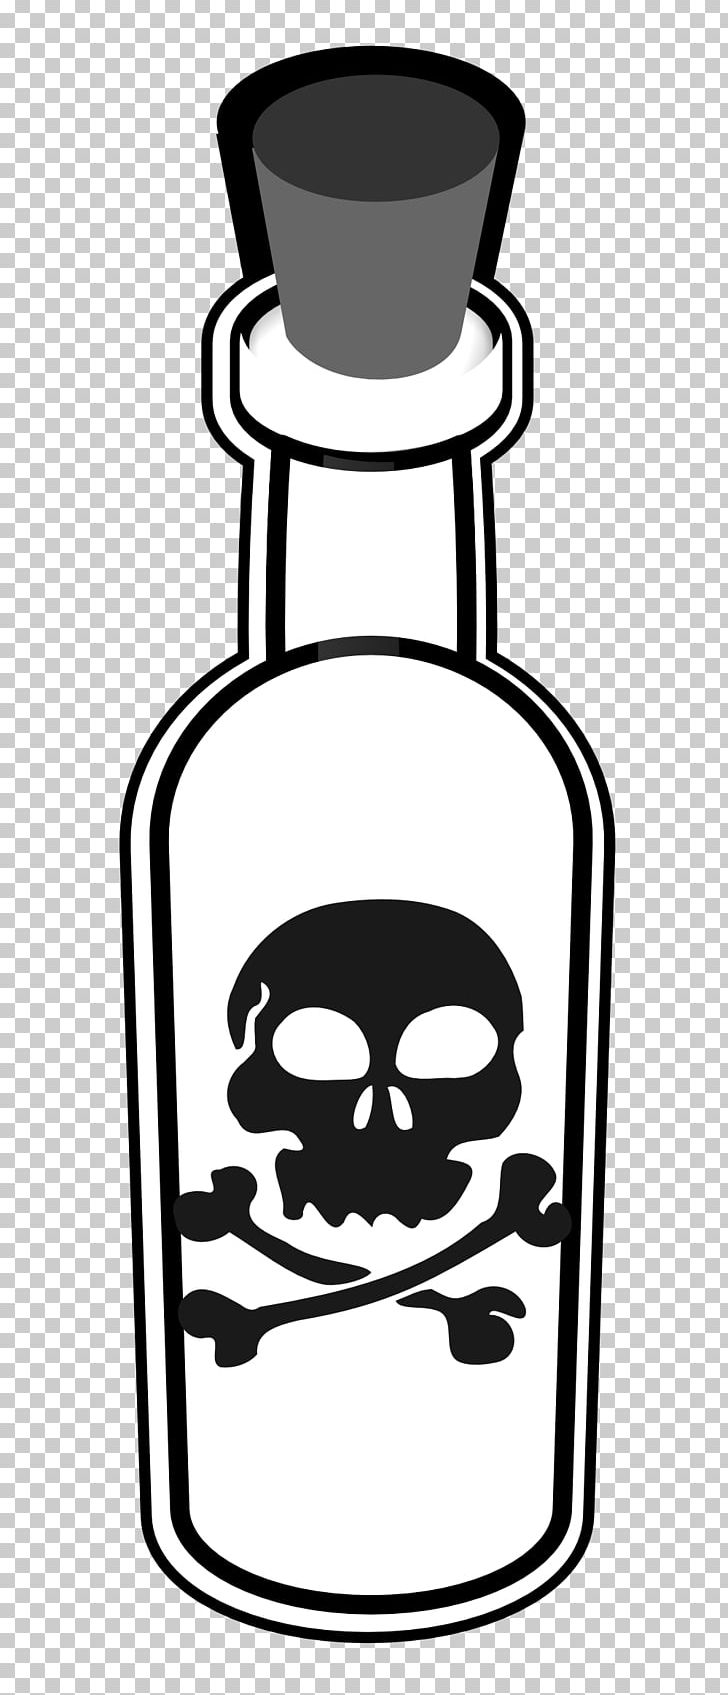 Poison PNG, Clipart, Poison Free PNG Download